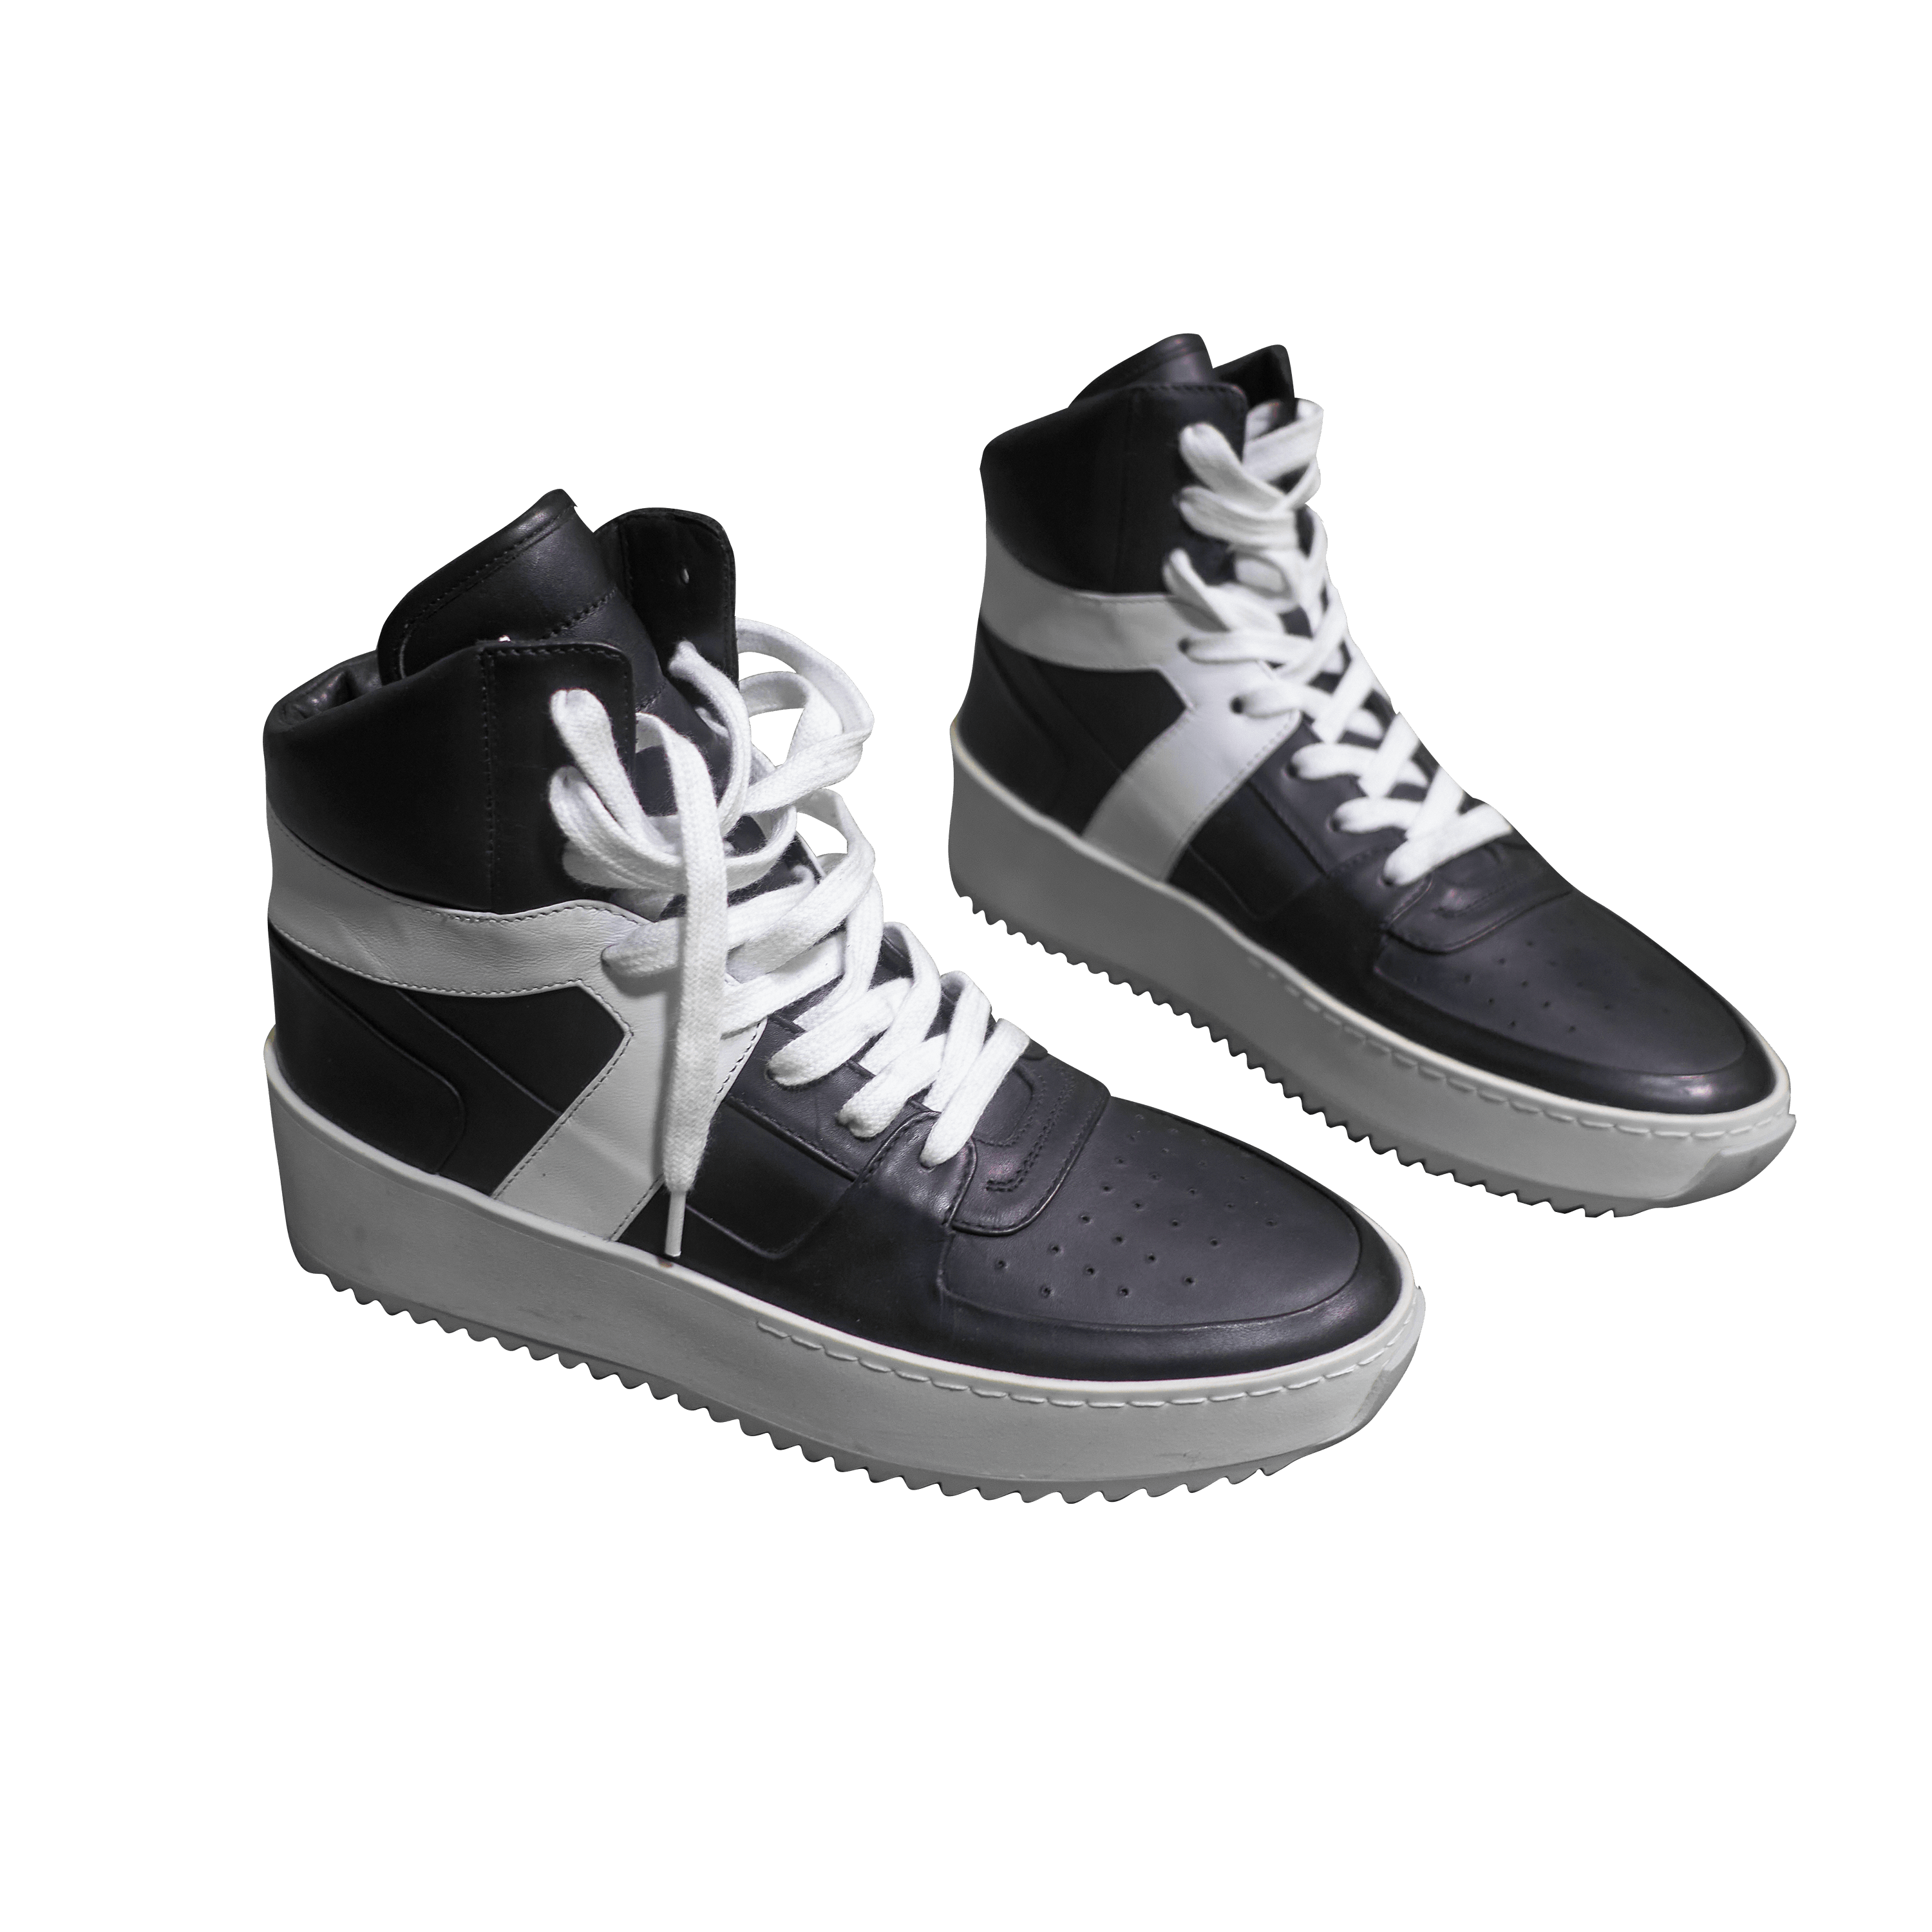 Fear Of God Basketball Sneakers | Grailed